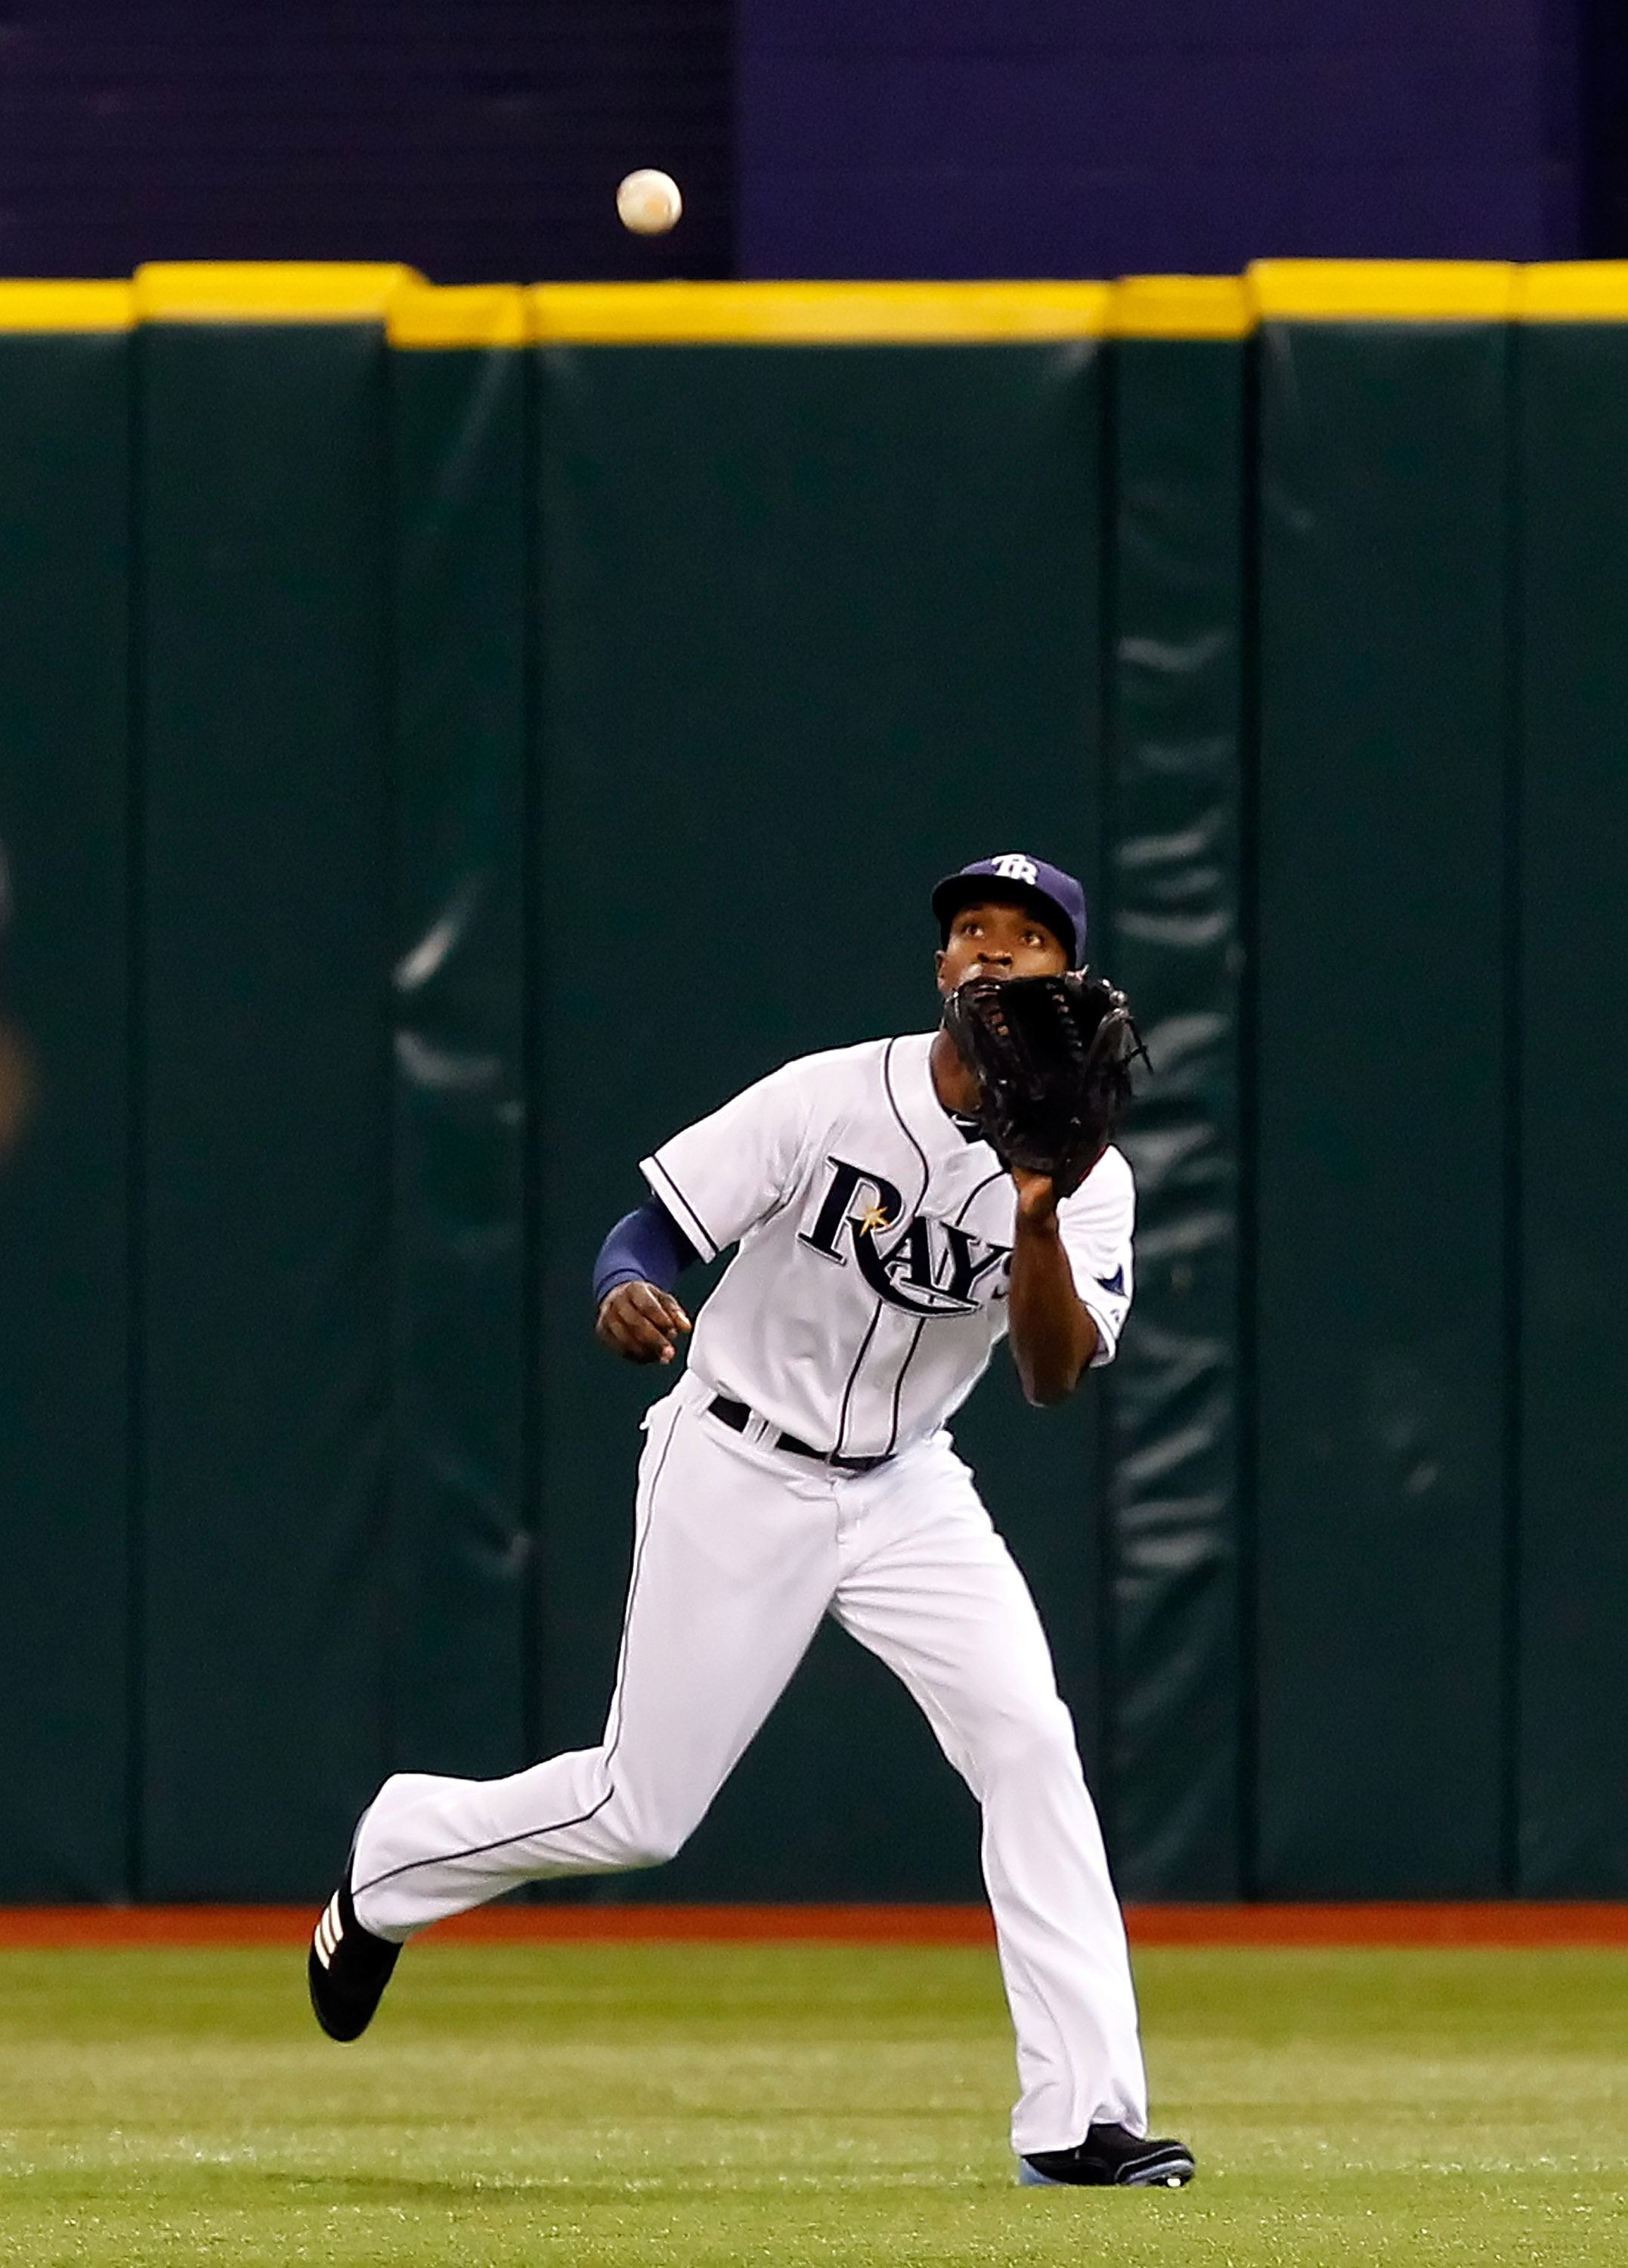 ST. PETERSBURG, FL - MAY 16:  Outfielder B.J. Upton #2 of the Tampa Bay Rays catches a fly ball against the New York Yankees during the game at Tropicana Field on May 16, 2011 in St. Petersburg, Florida.  (Photo by J. Meric/Getty Images)